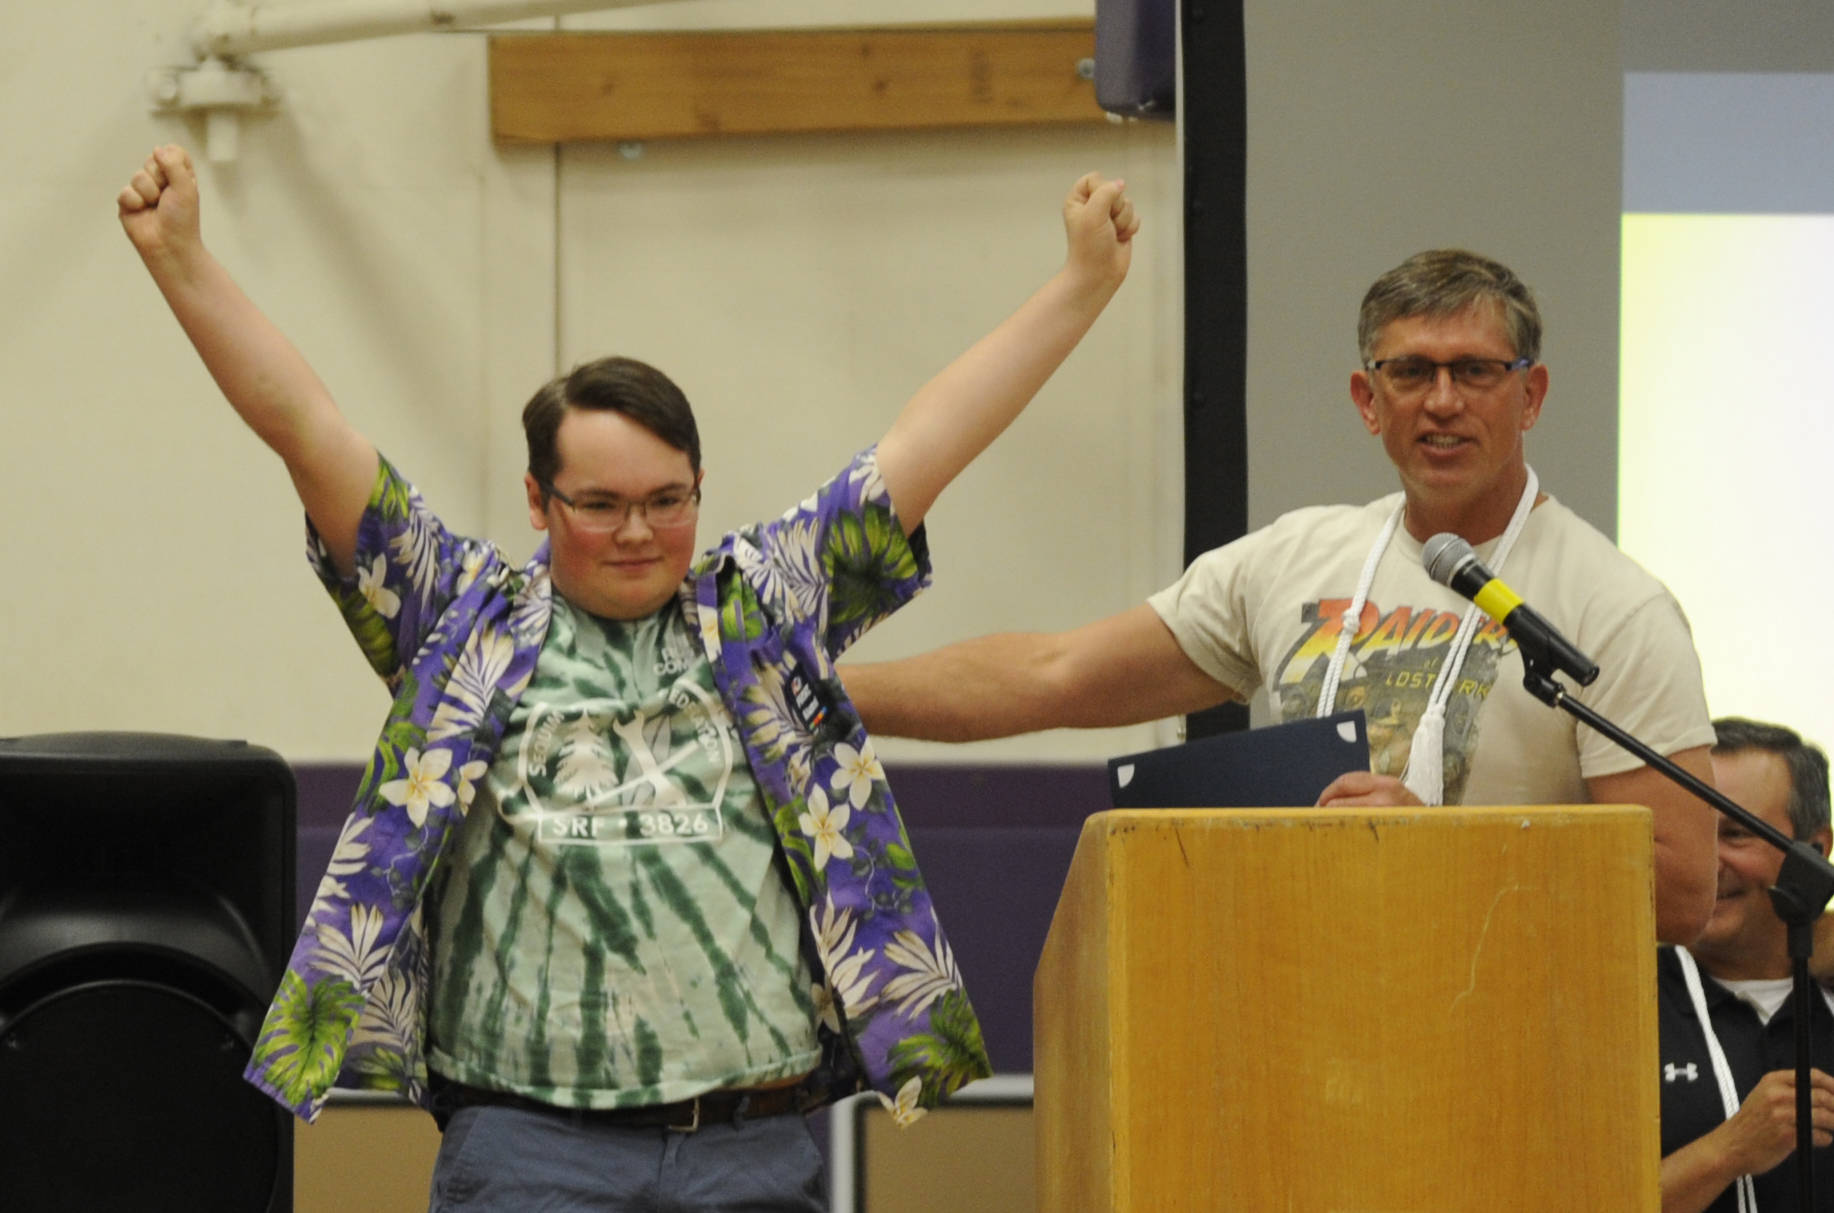 Sequim High senior Ben Logan receives the SHS CTE (career and technical education) award from SHS teacher Brad Moore at a Senior Recognition Assembly on May 31. Sequim Gazette photo by Michael Dashiell